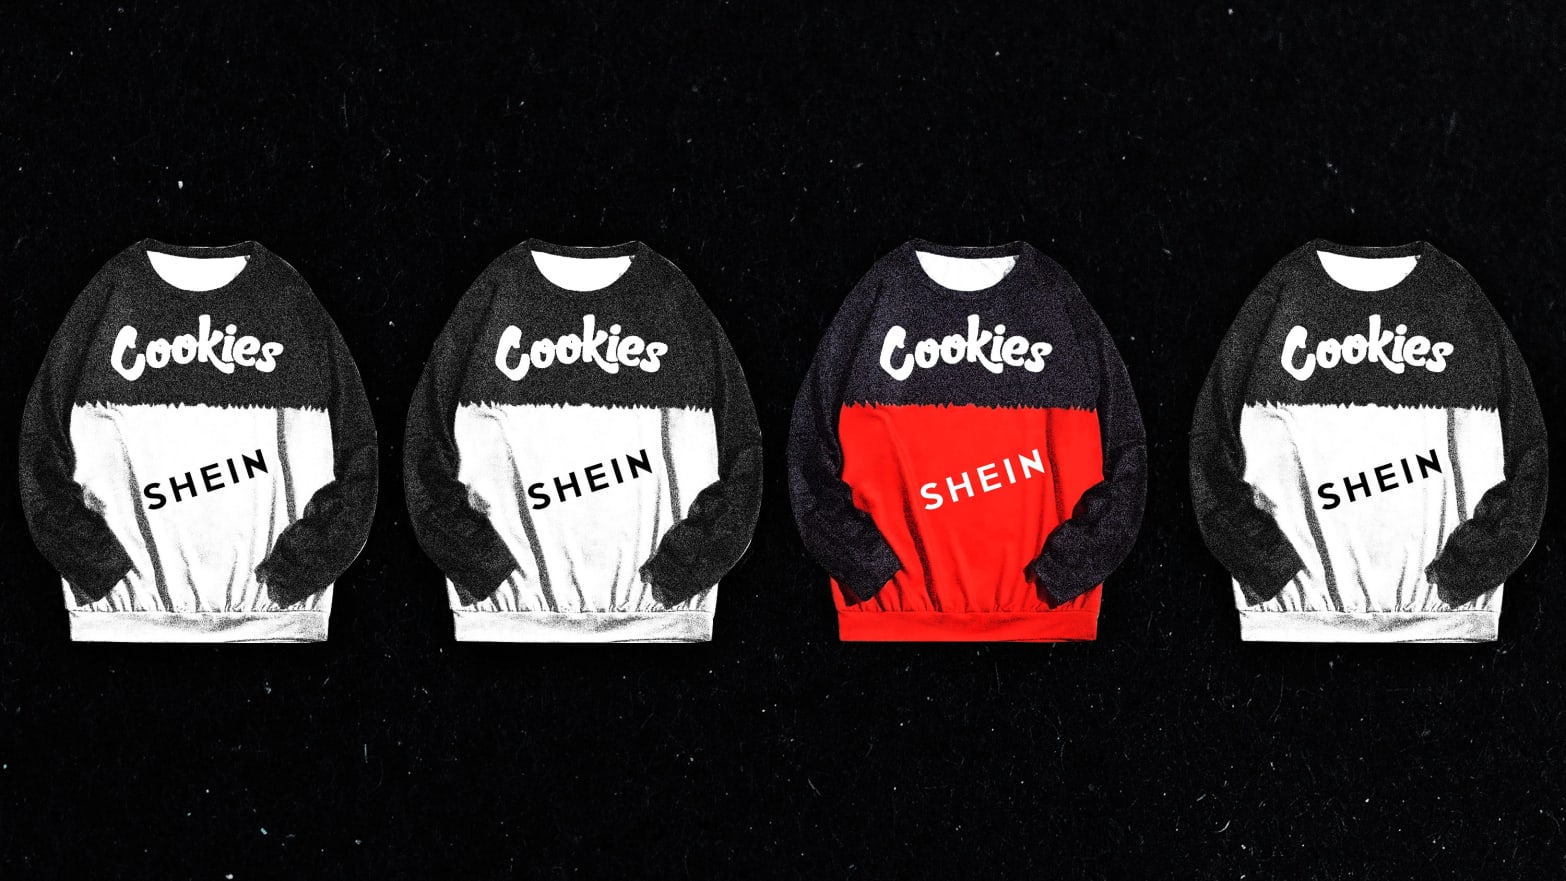 Fashion Giant Shein Sued for Stealing Weed Brand Cookies’ Sweatshirt Design